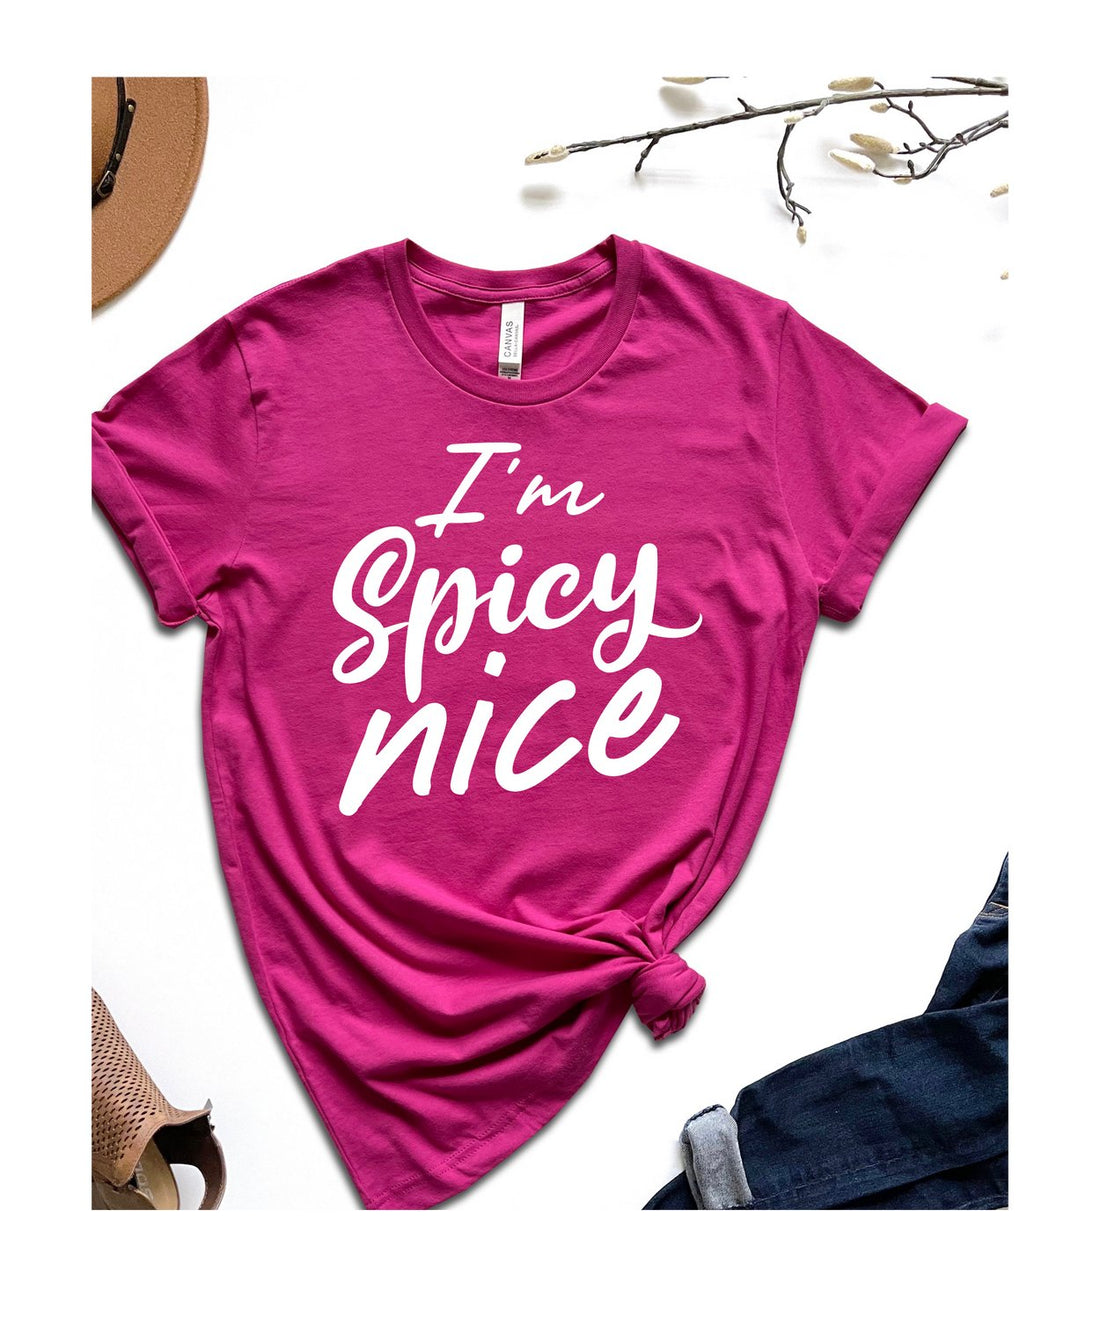 Spicy Nice T-Shirt - T-Shirts - Positively Sassy - Spicy Nice T-Shirt